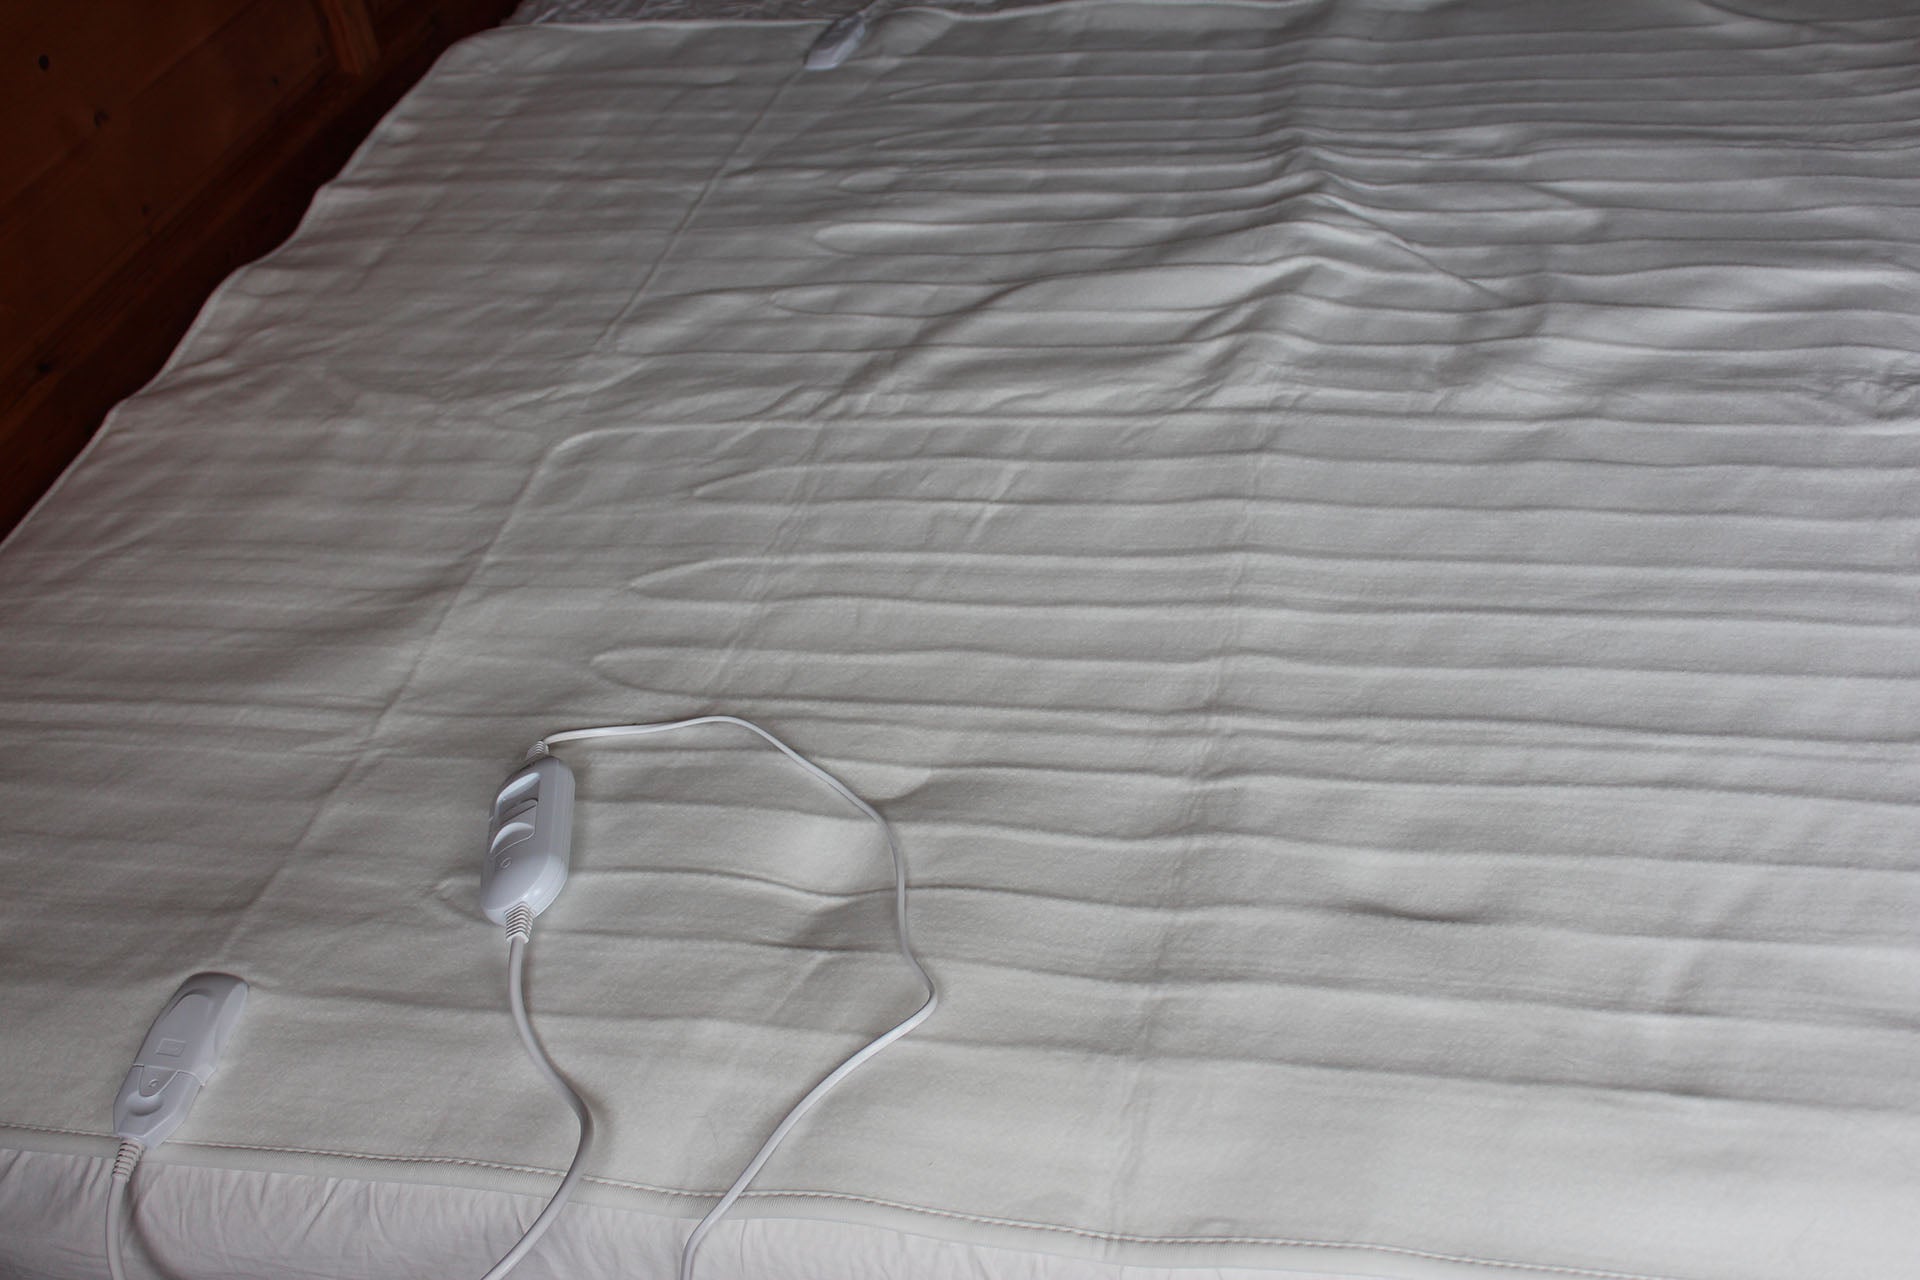 Vonhaus King Size Electric Blanket fitted to bed